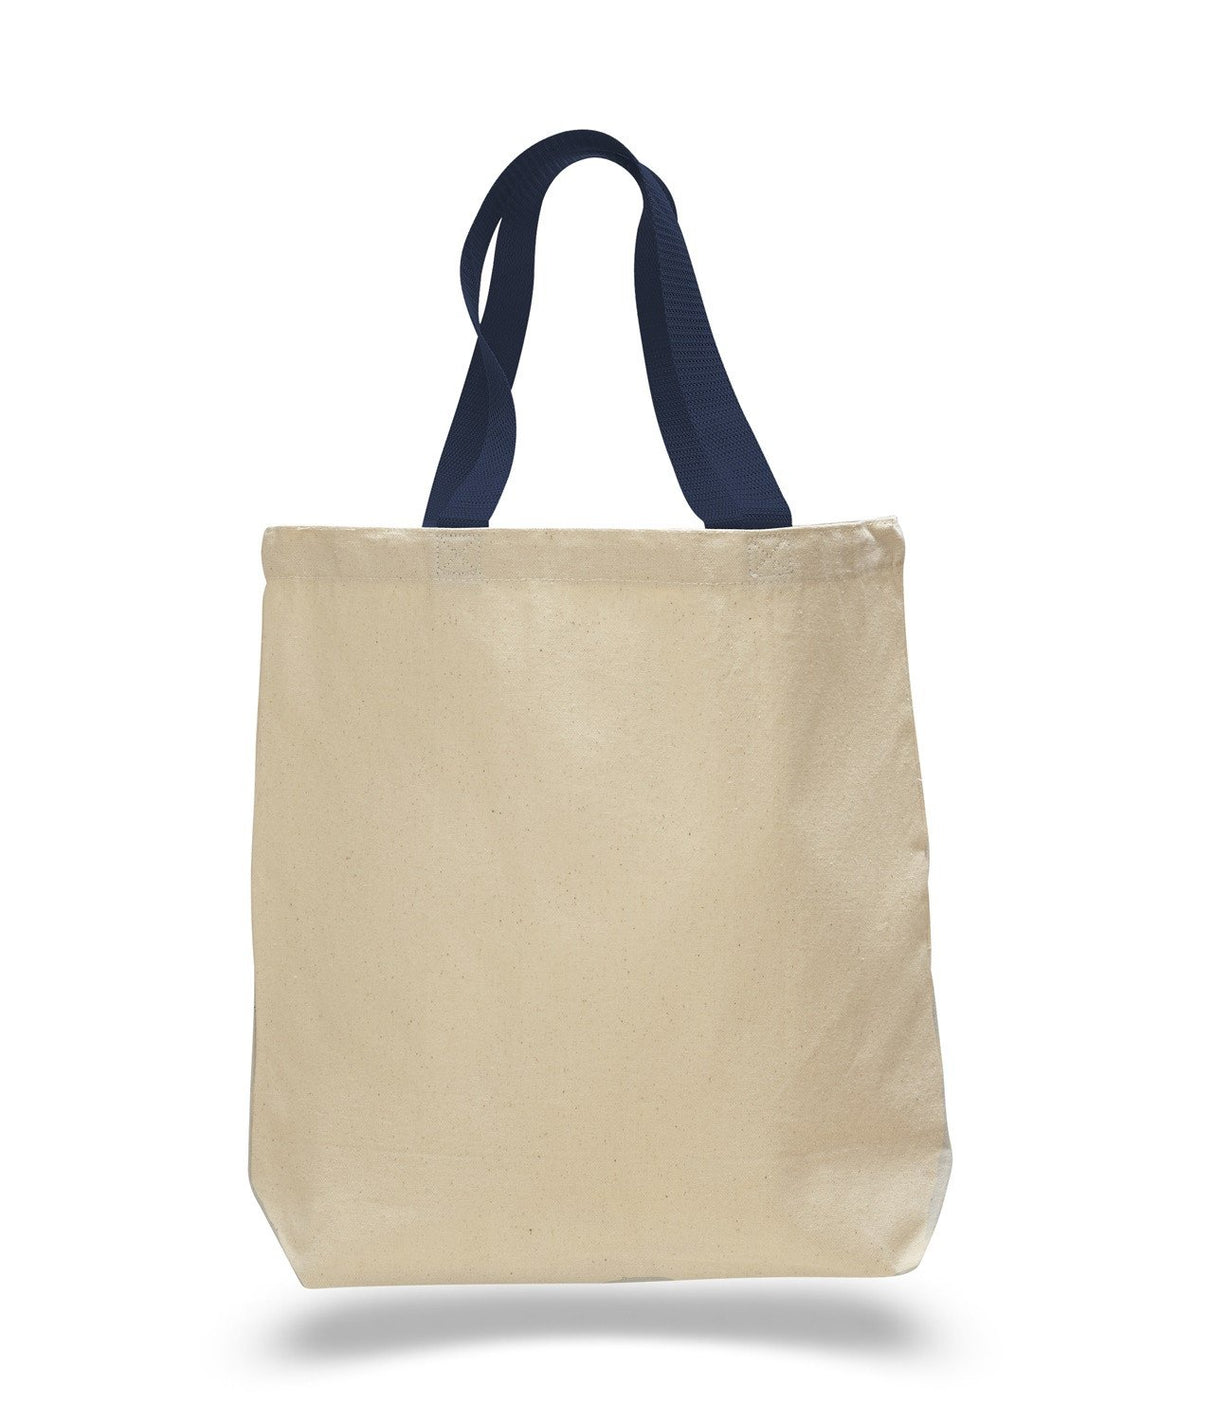 Cheap Canvas Tote Bags with Contrast Handles Navy